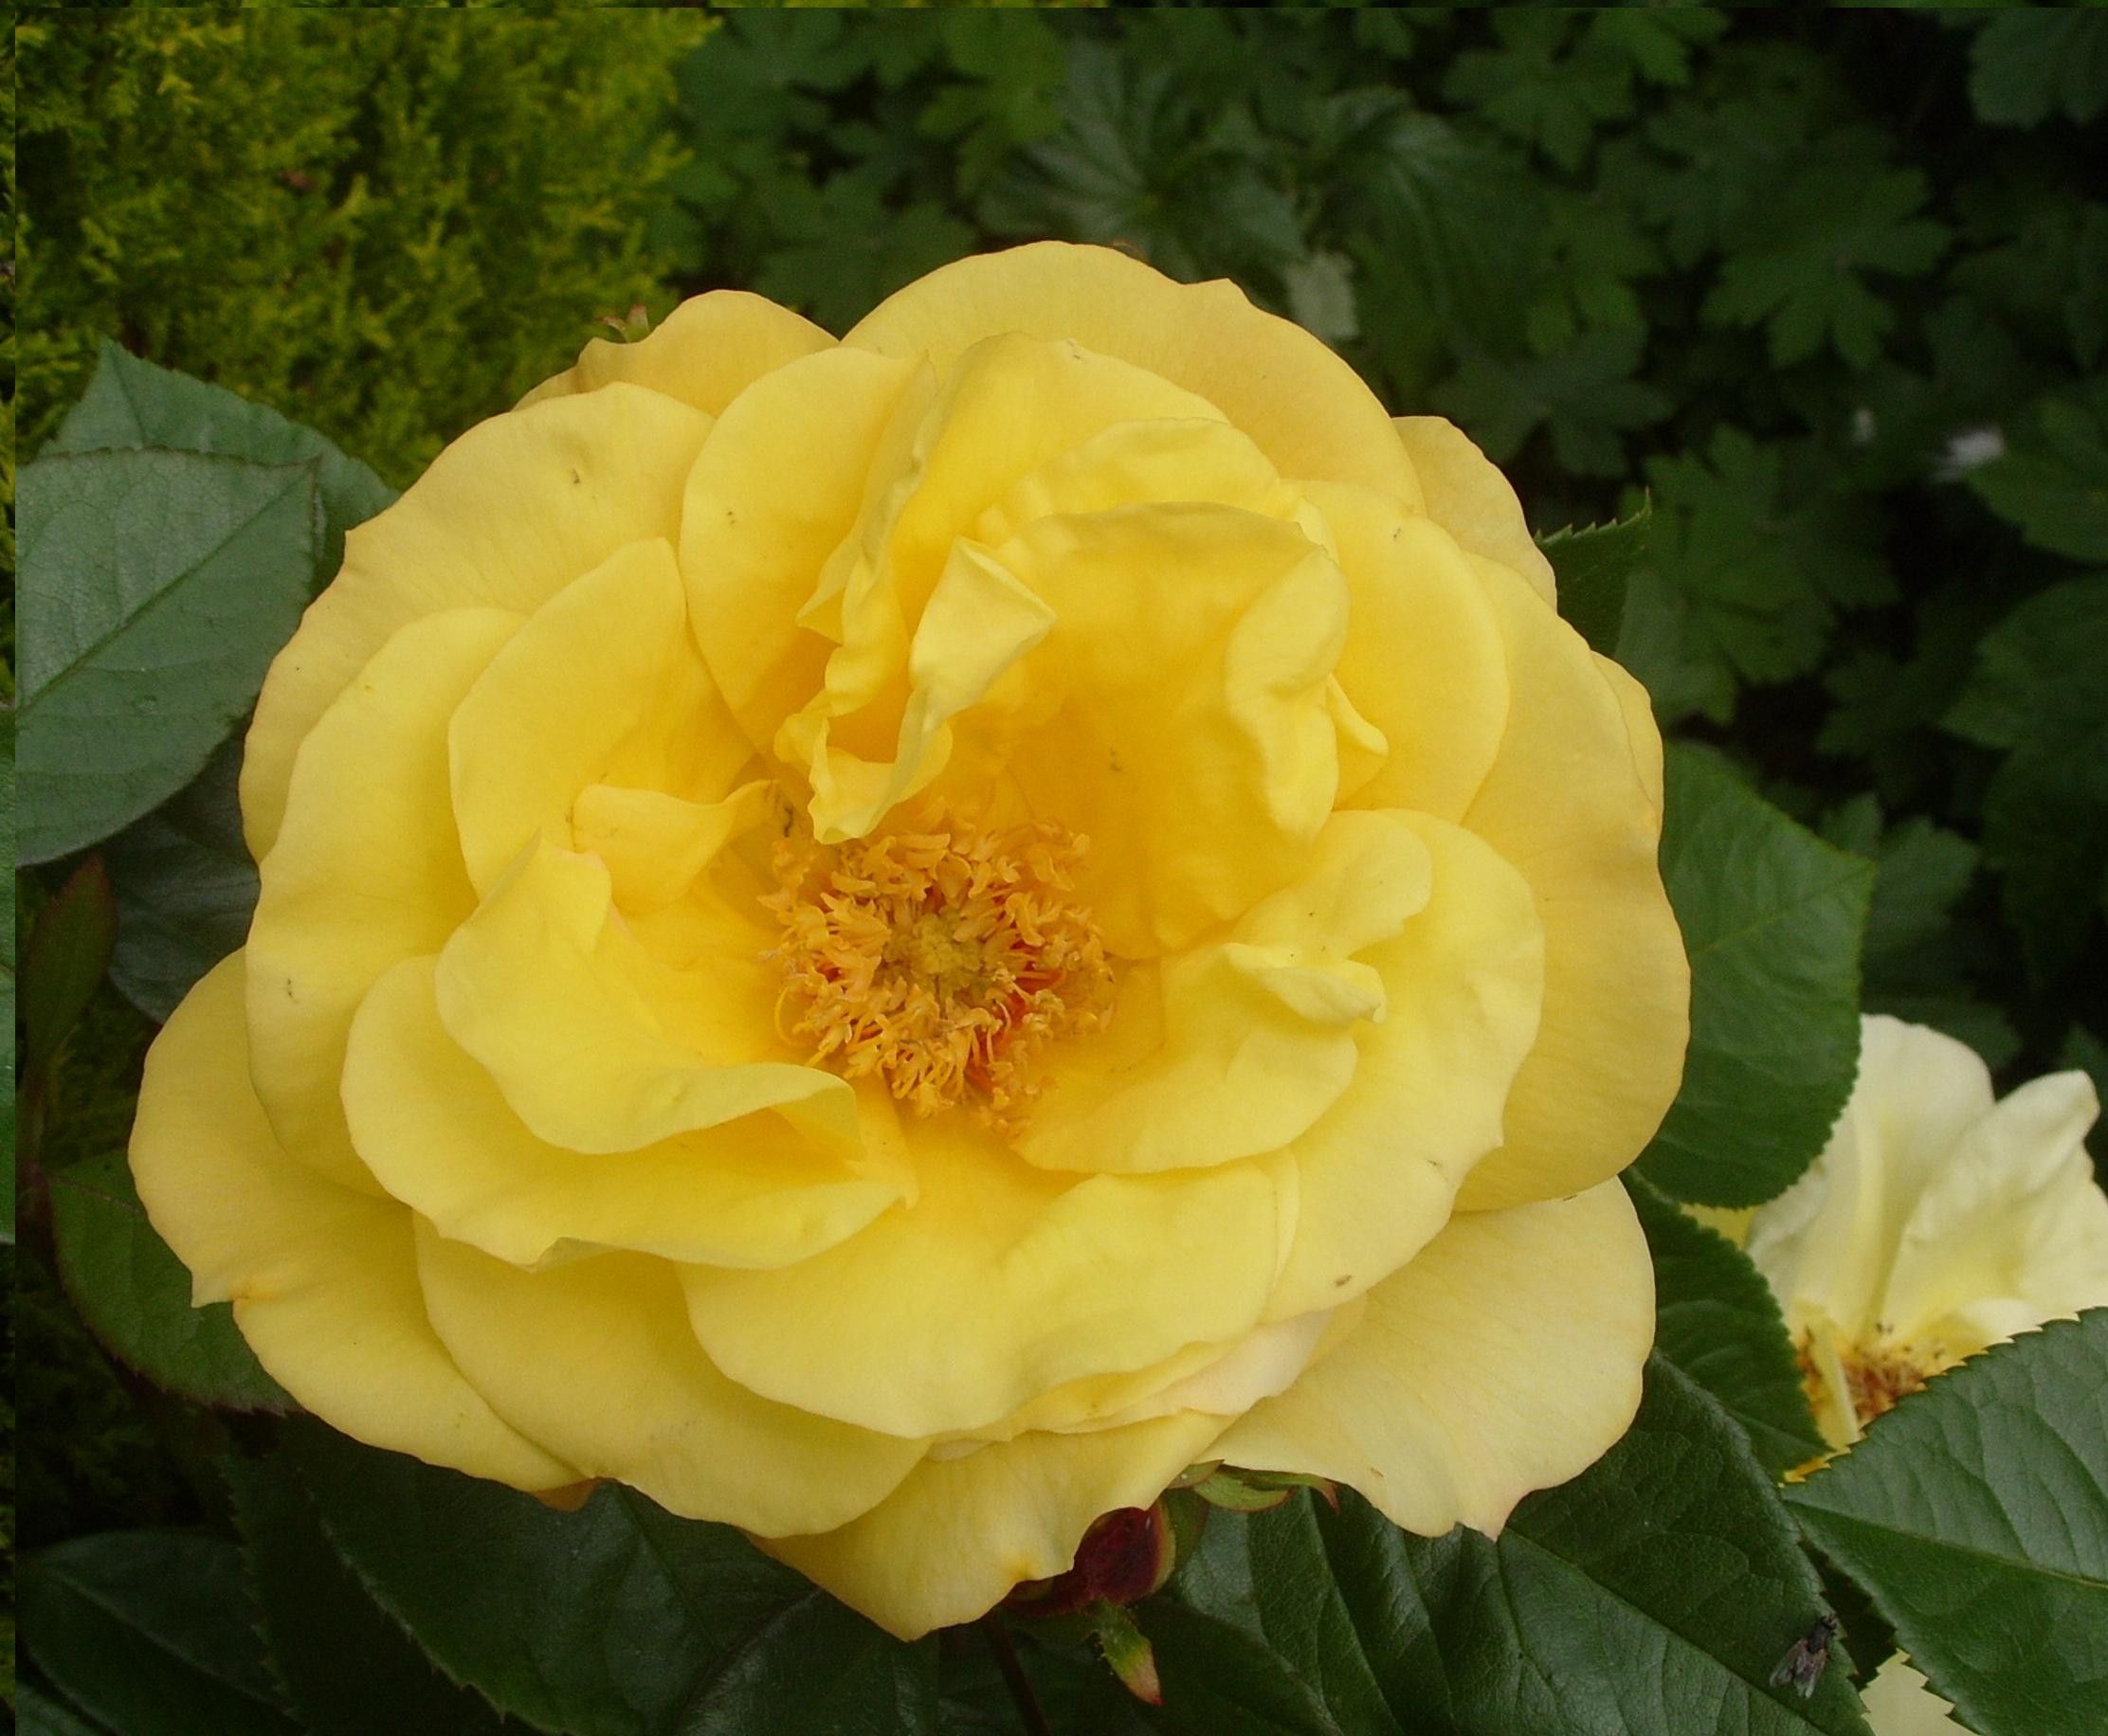 The Yellow Rose - Garden Roses , HD Wallpaper & Backgrounds